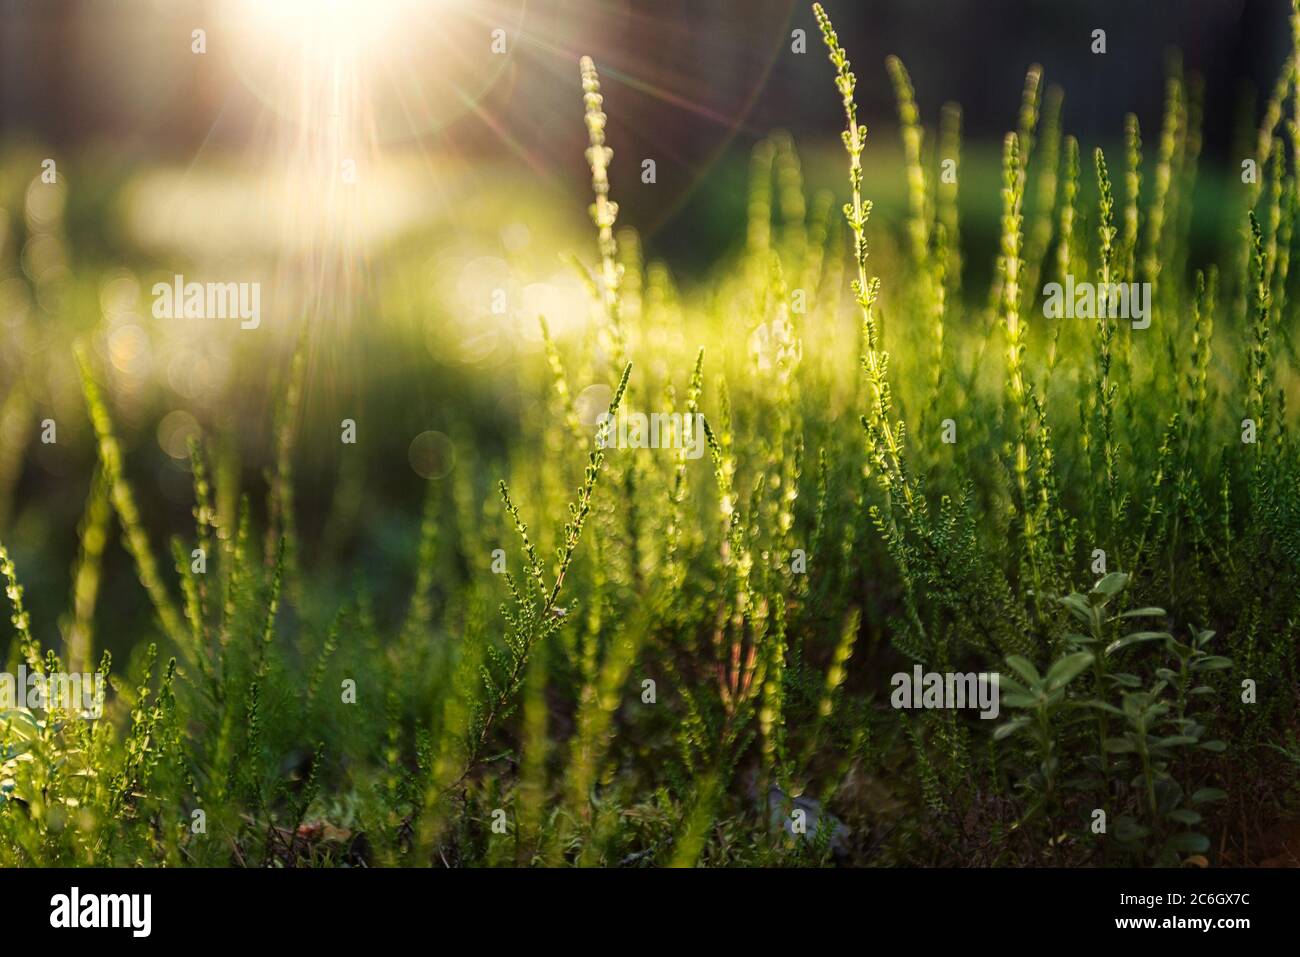 Abstract dreamy photo of summer forest meadow. Grass and bushes glow in ...